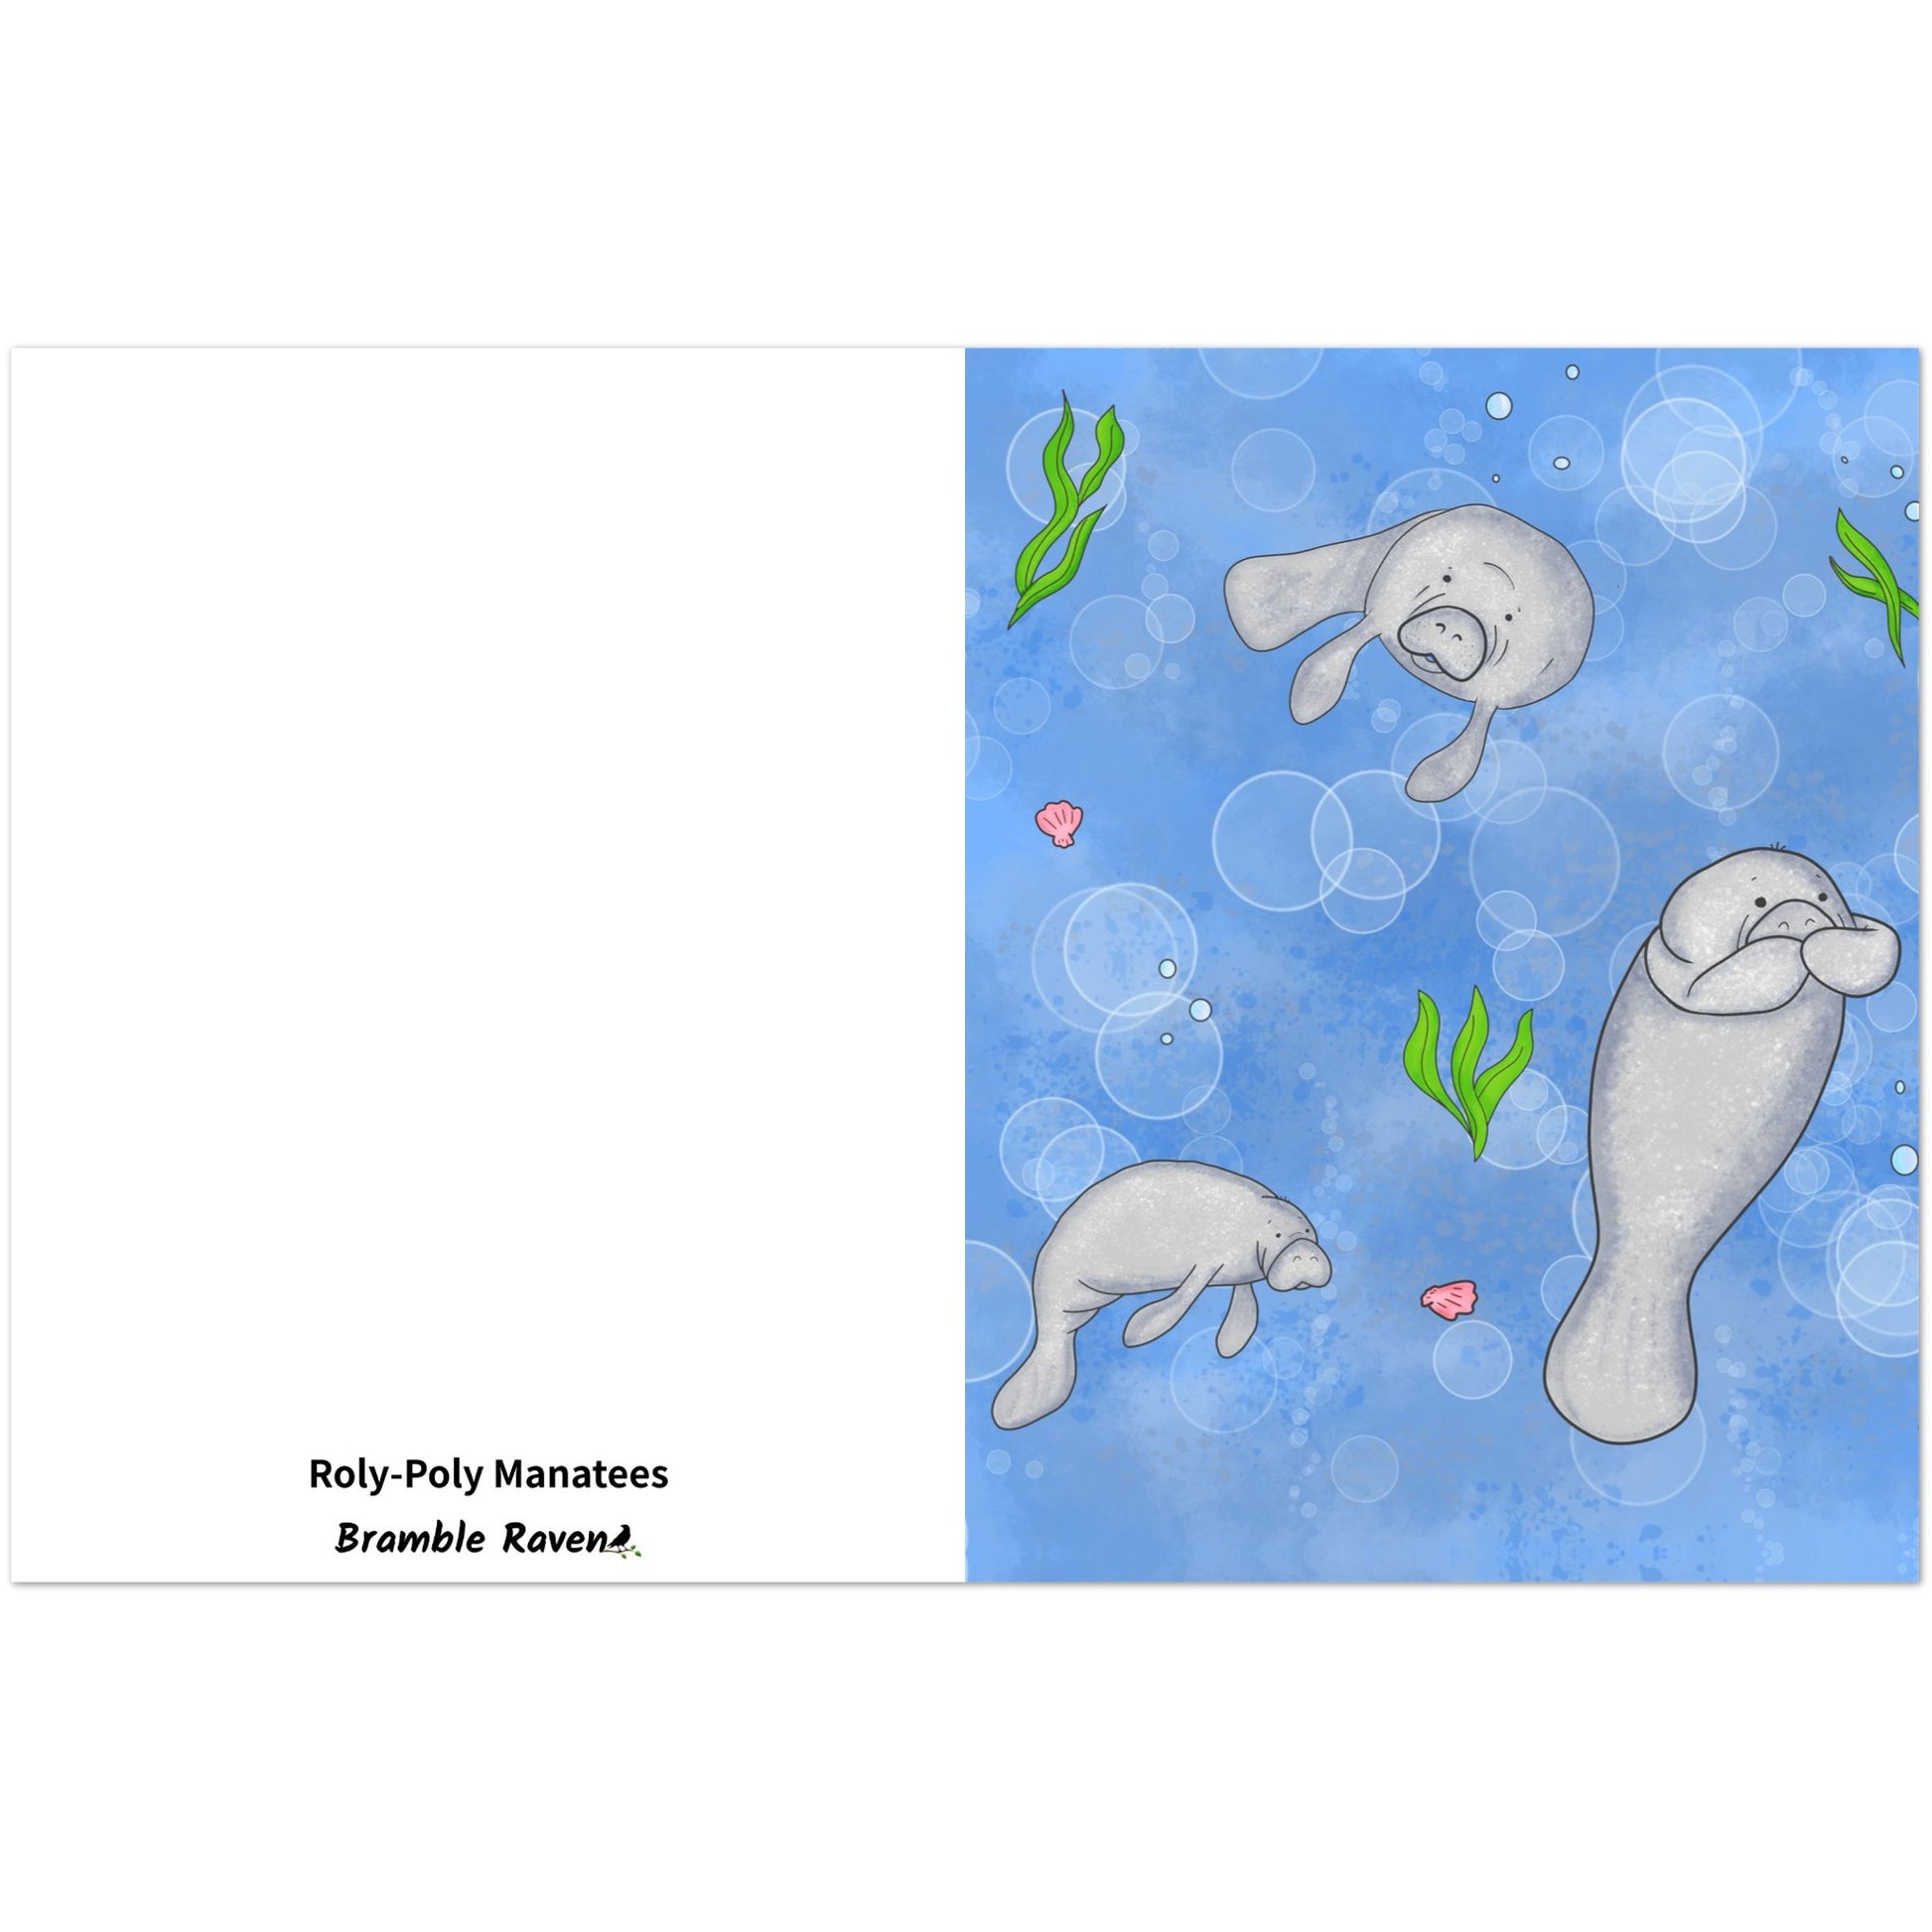 Pack of ten 4.25 x 5.5 inch greeting cards. Features illustrated roly-poly manatees on the front. Inside is blank. Made of coated paperboard. Comes with envelopes.